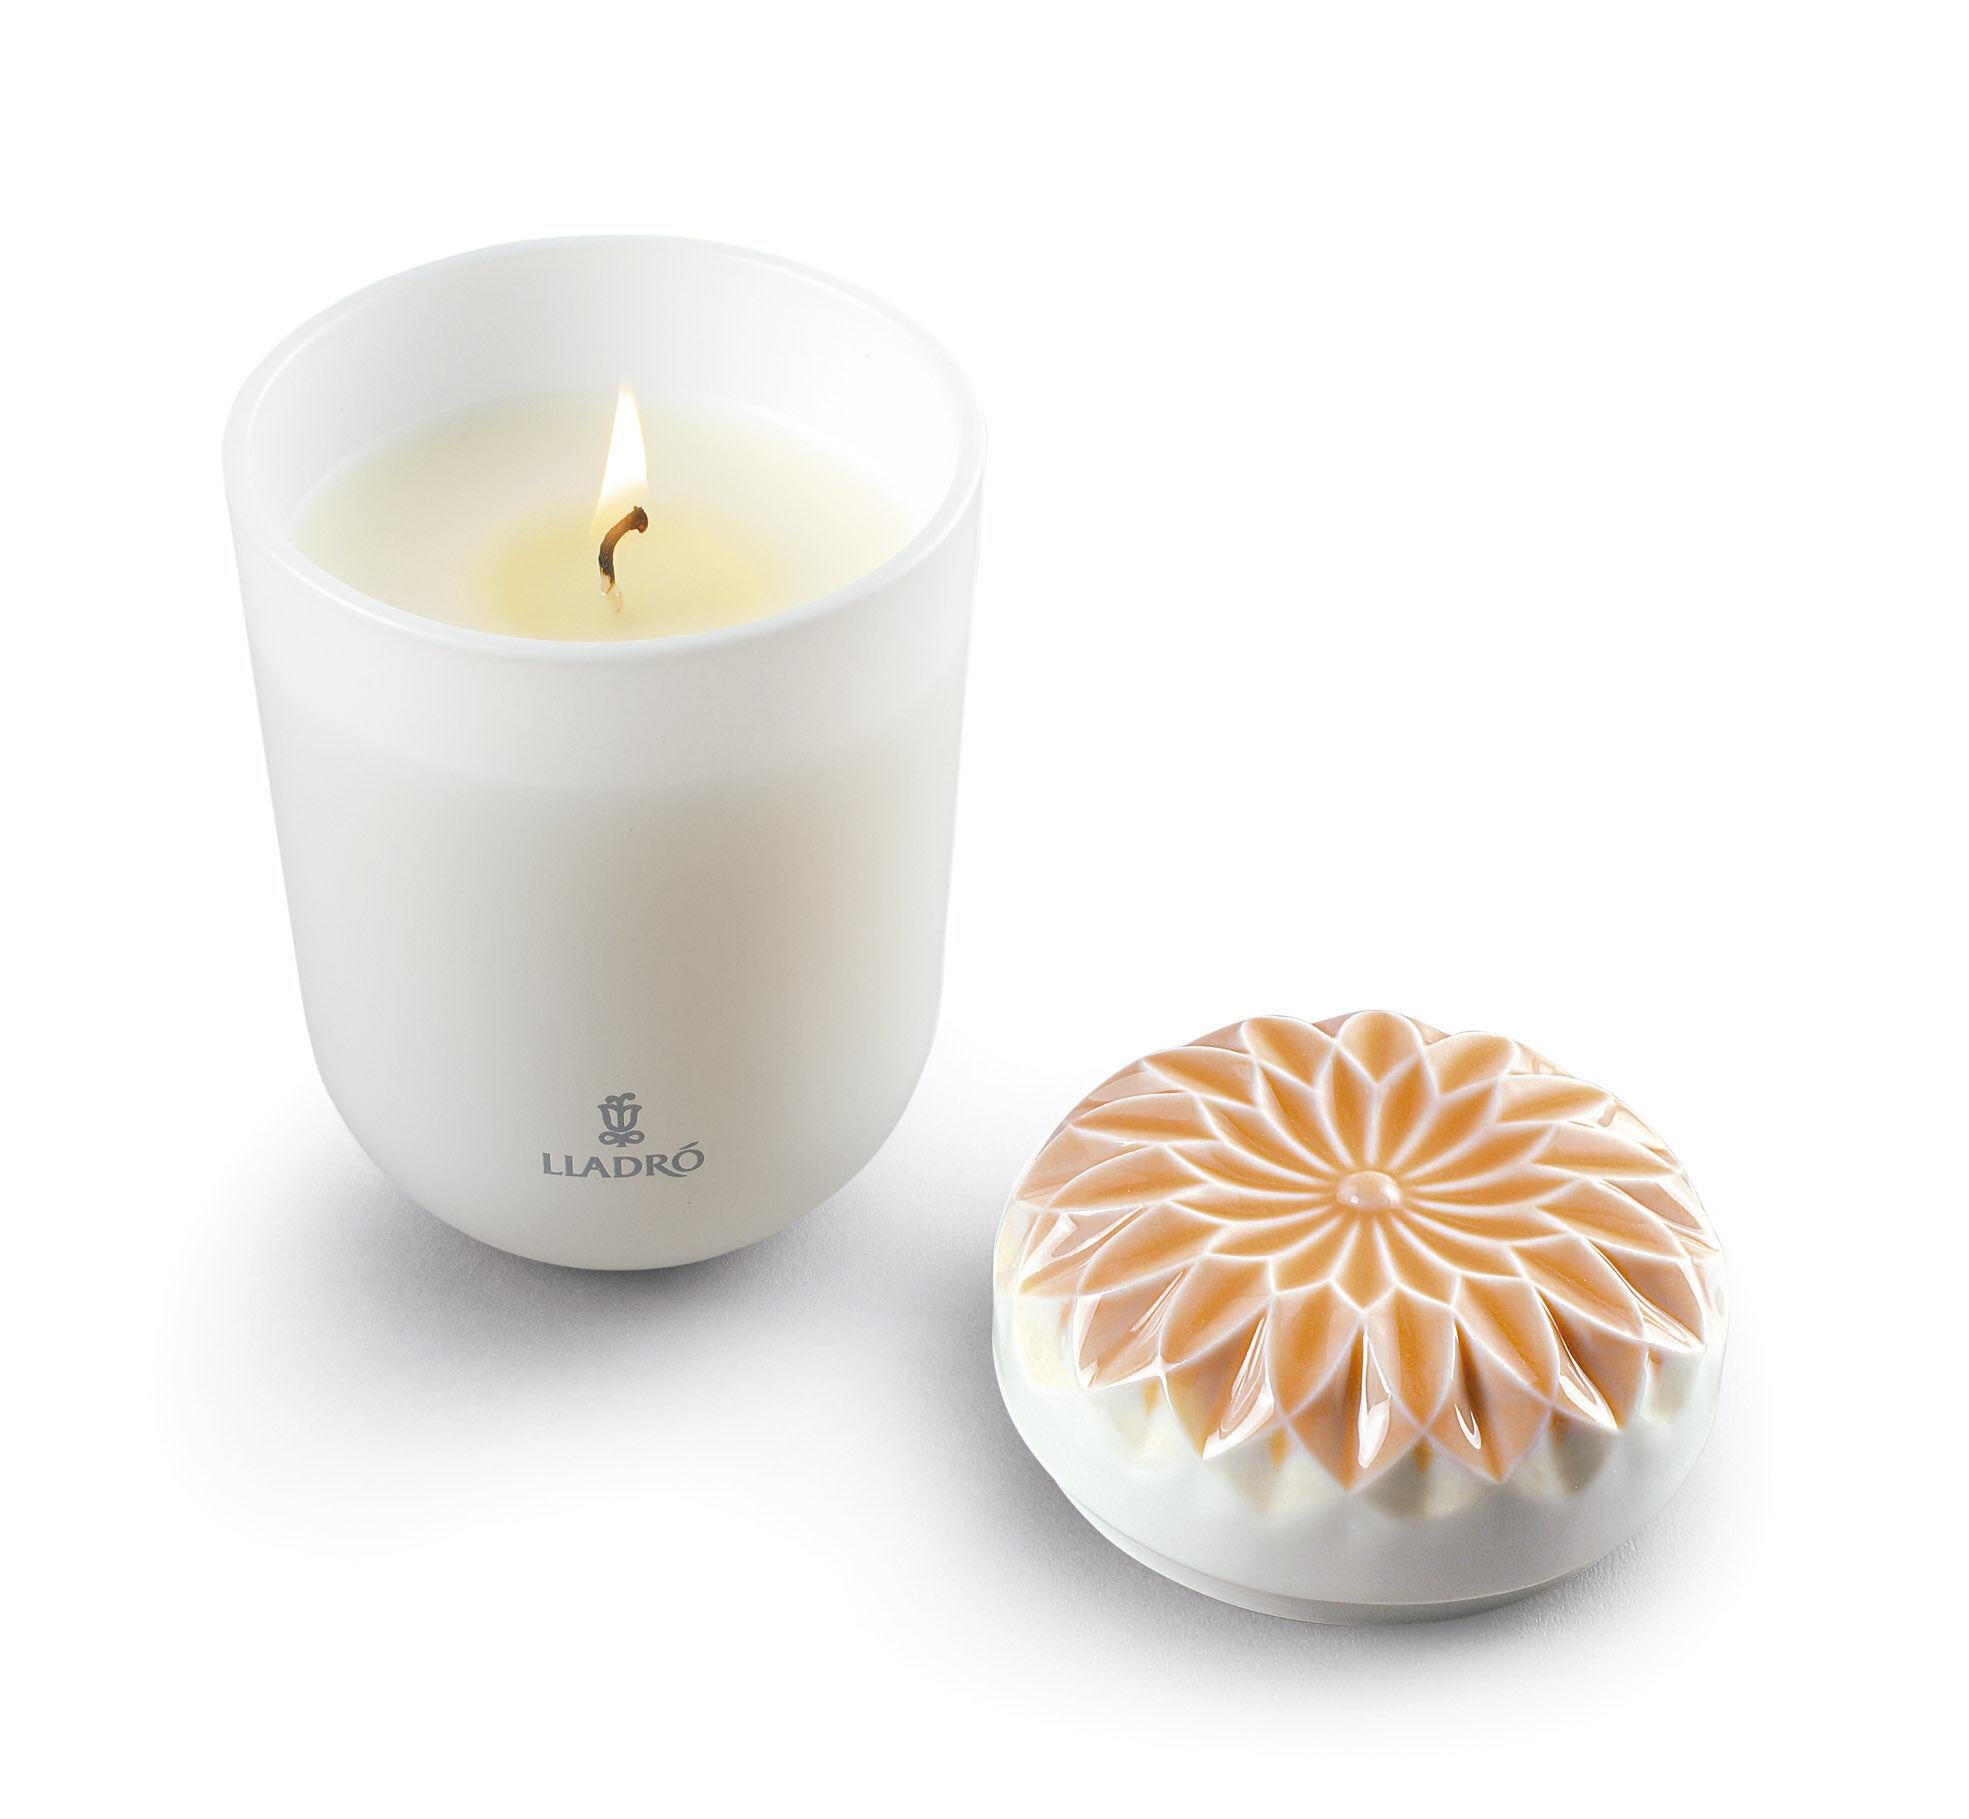 Echoes of nature candle. Gardens of Valencia Scent
In stock in Los Angeles

Home candle in Matte white porcelain with a fruity aroma and an elaborate porcelain lid, hand engraved and hand painted with a design that is a metaphor for the fragrance